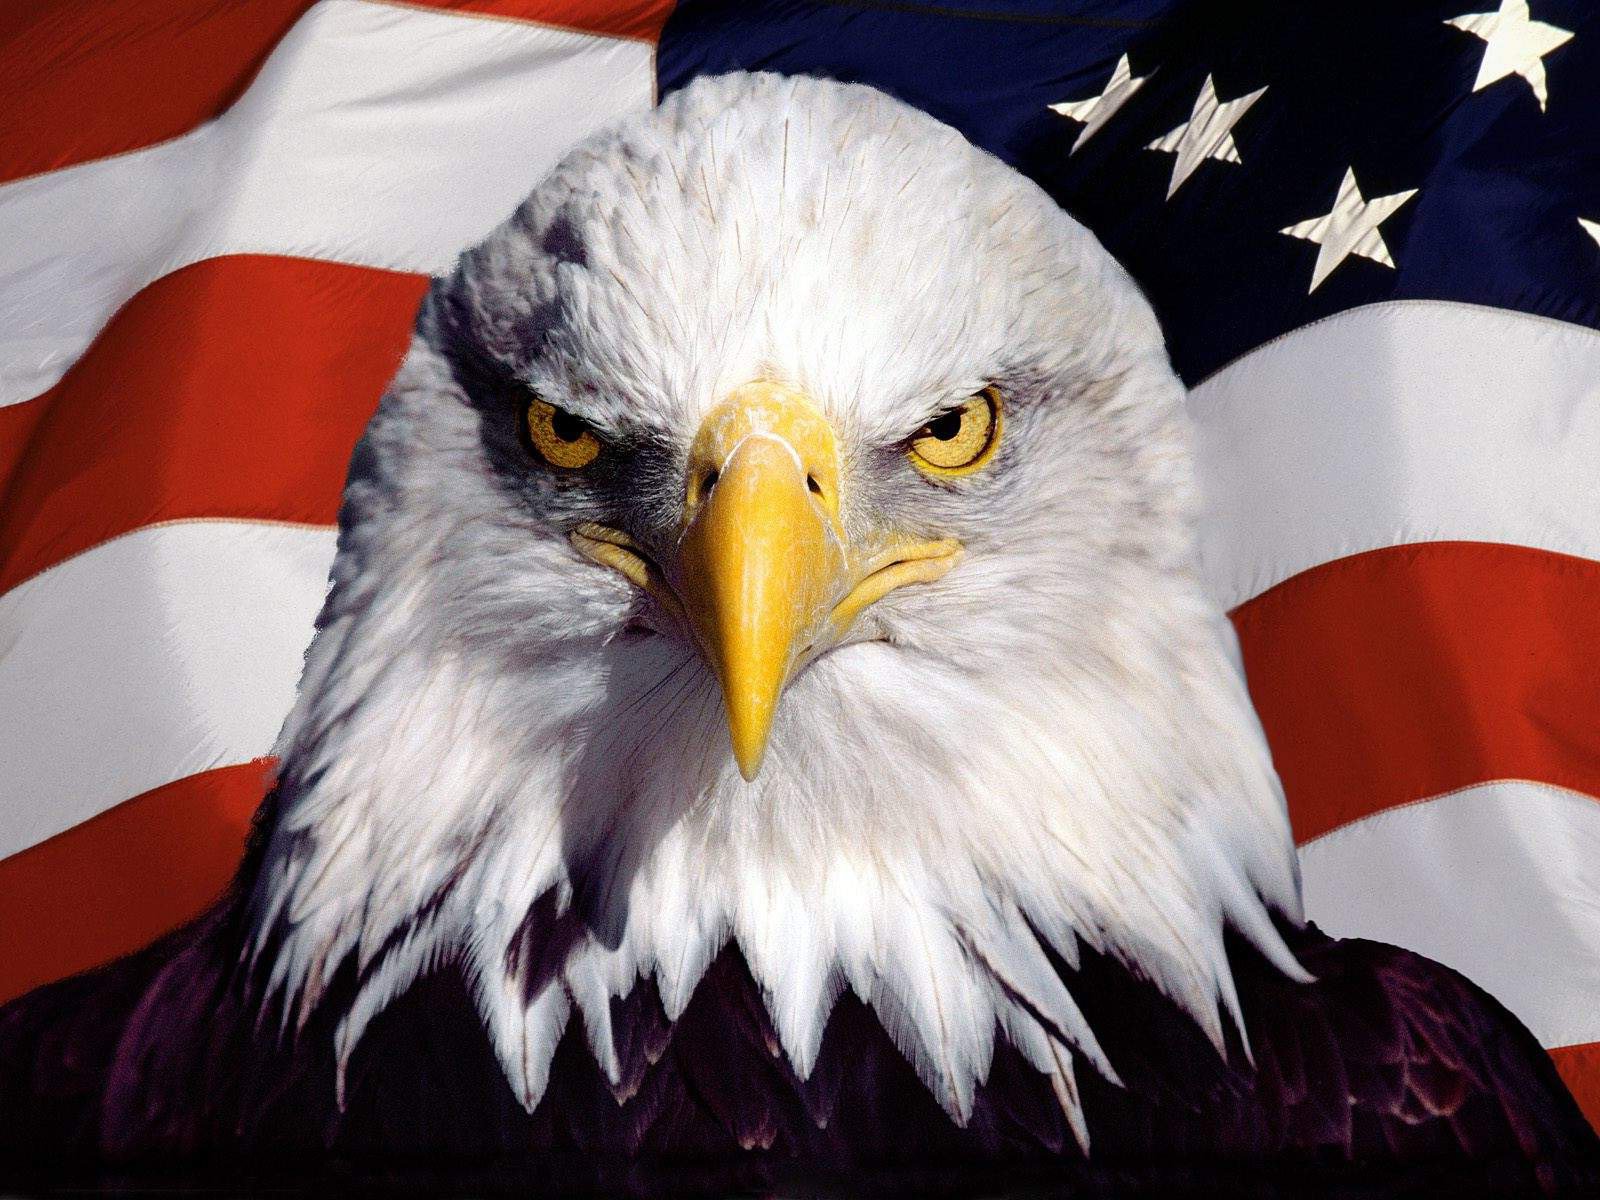 Bald Eagle American Flag Stock Photos, Pictures & Royalty 